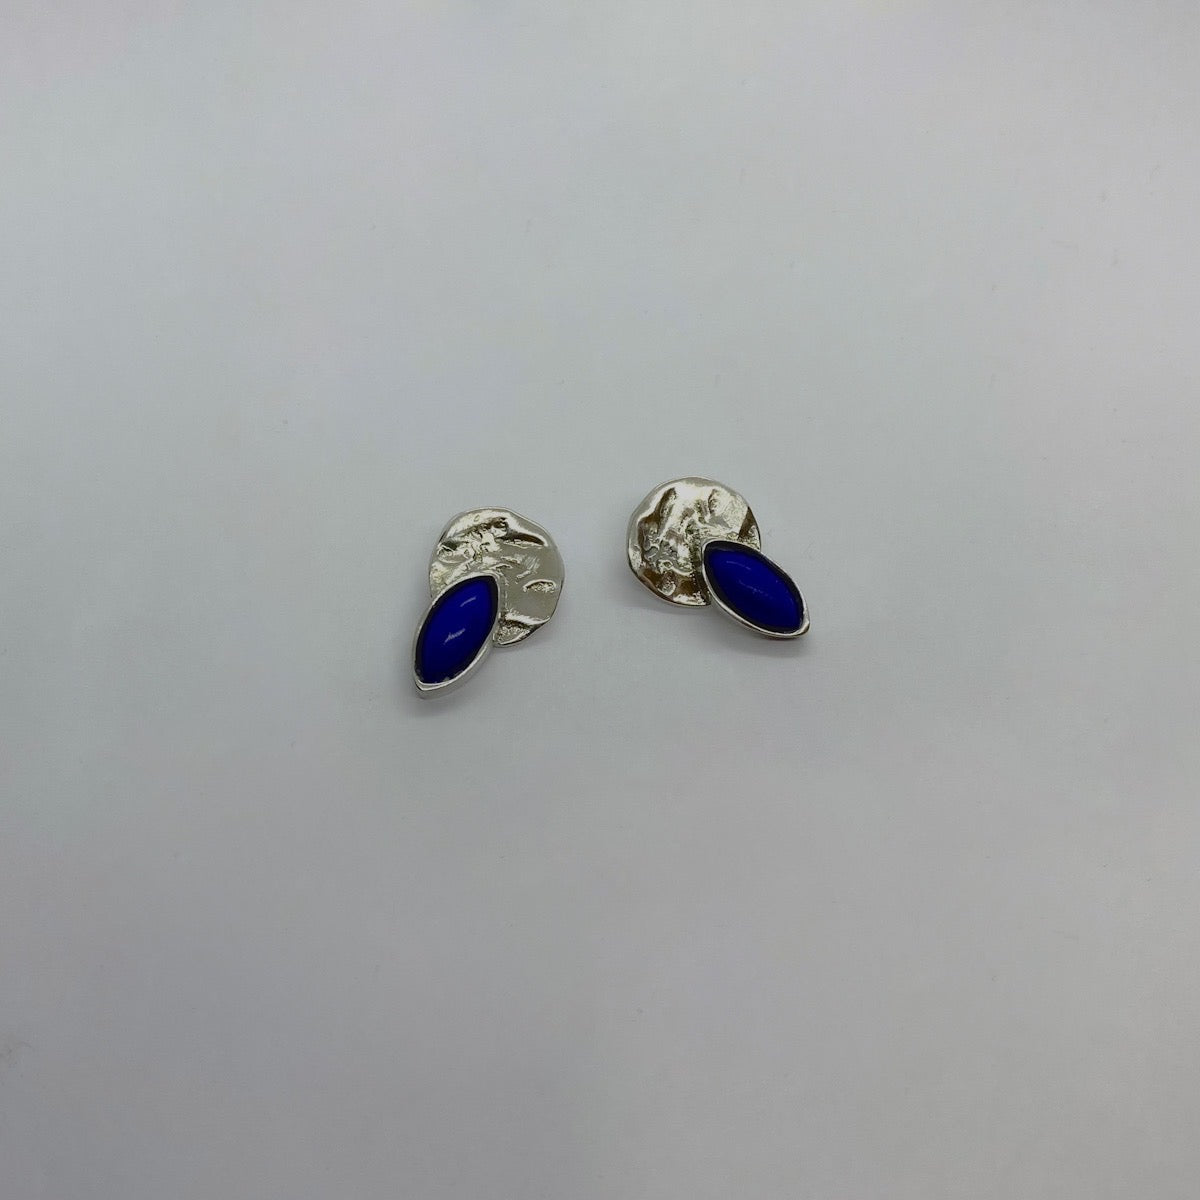 The Violet earrings is handmade and made of 925 sterling silver. Its base is circular with a raw texture, accompanied by an embedded blue semi-precious stone in the shape of a drop